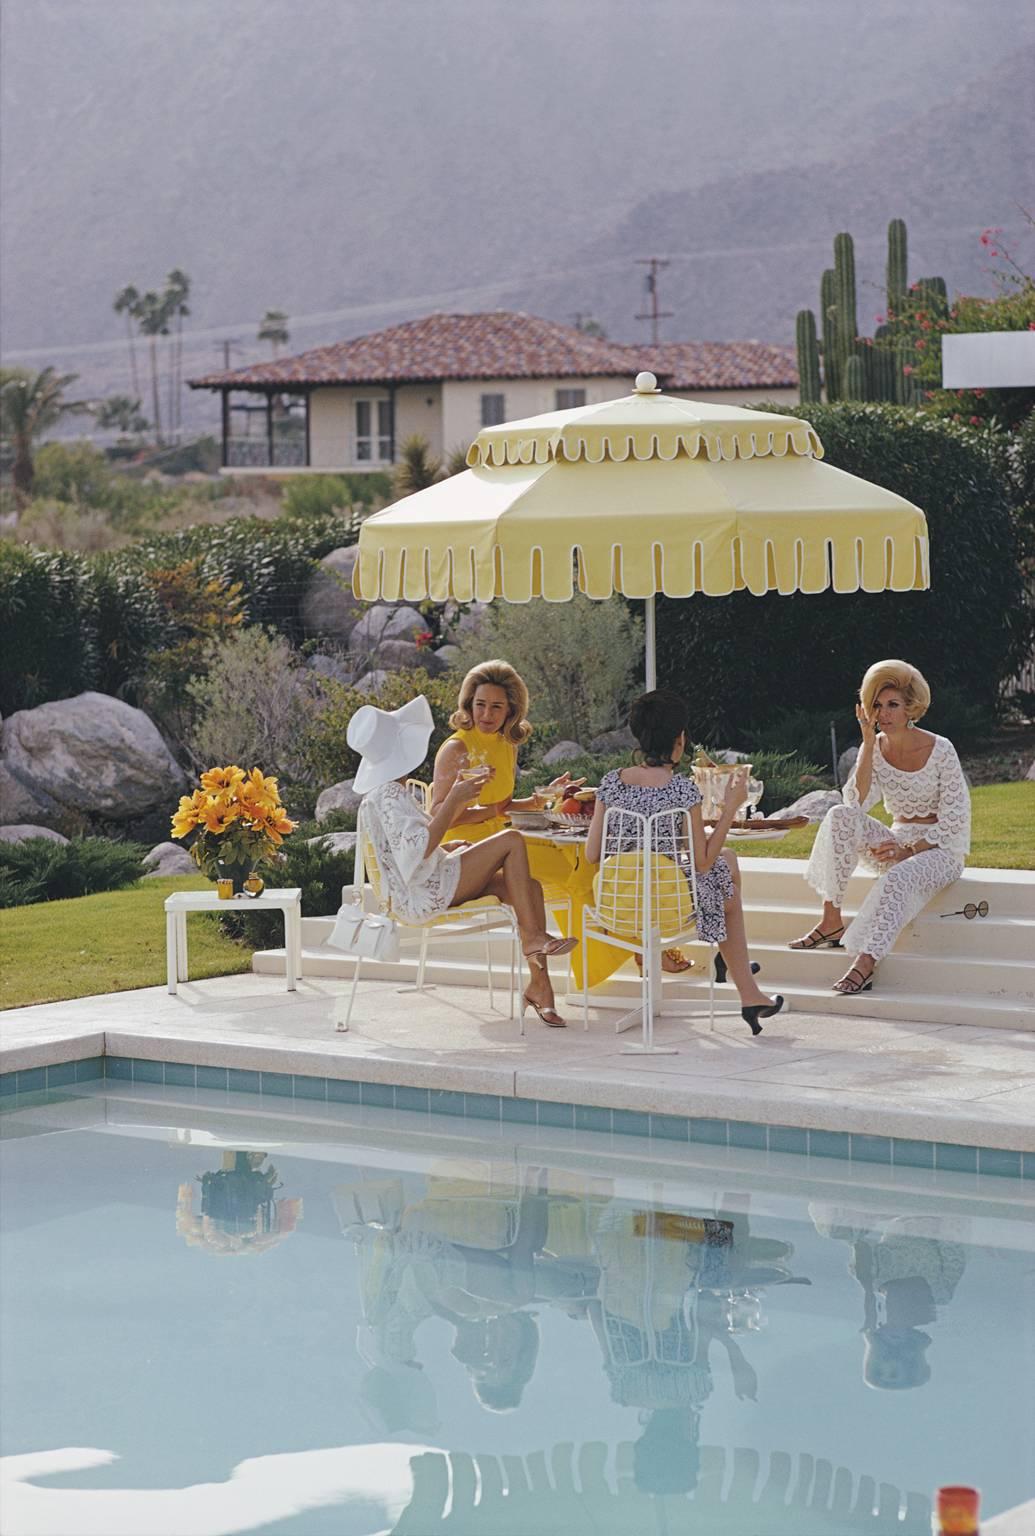 Slim Aarons Figurative Photograph - 'Nelda And Friends' Palm Springs  (Estate Stamped Edition)